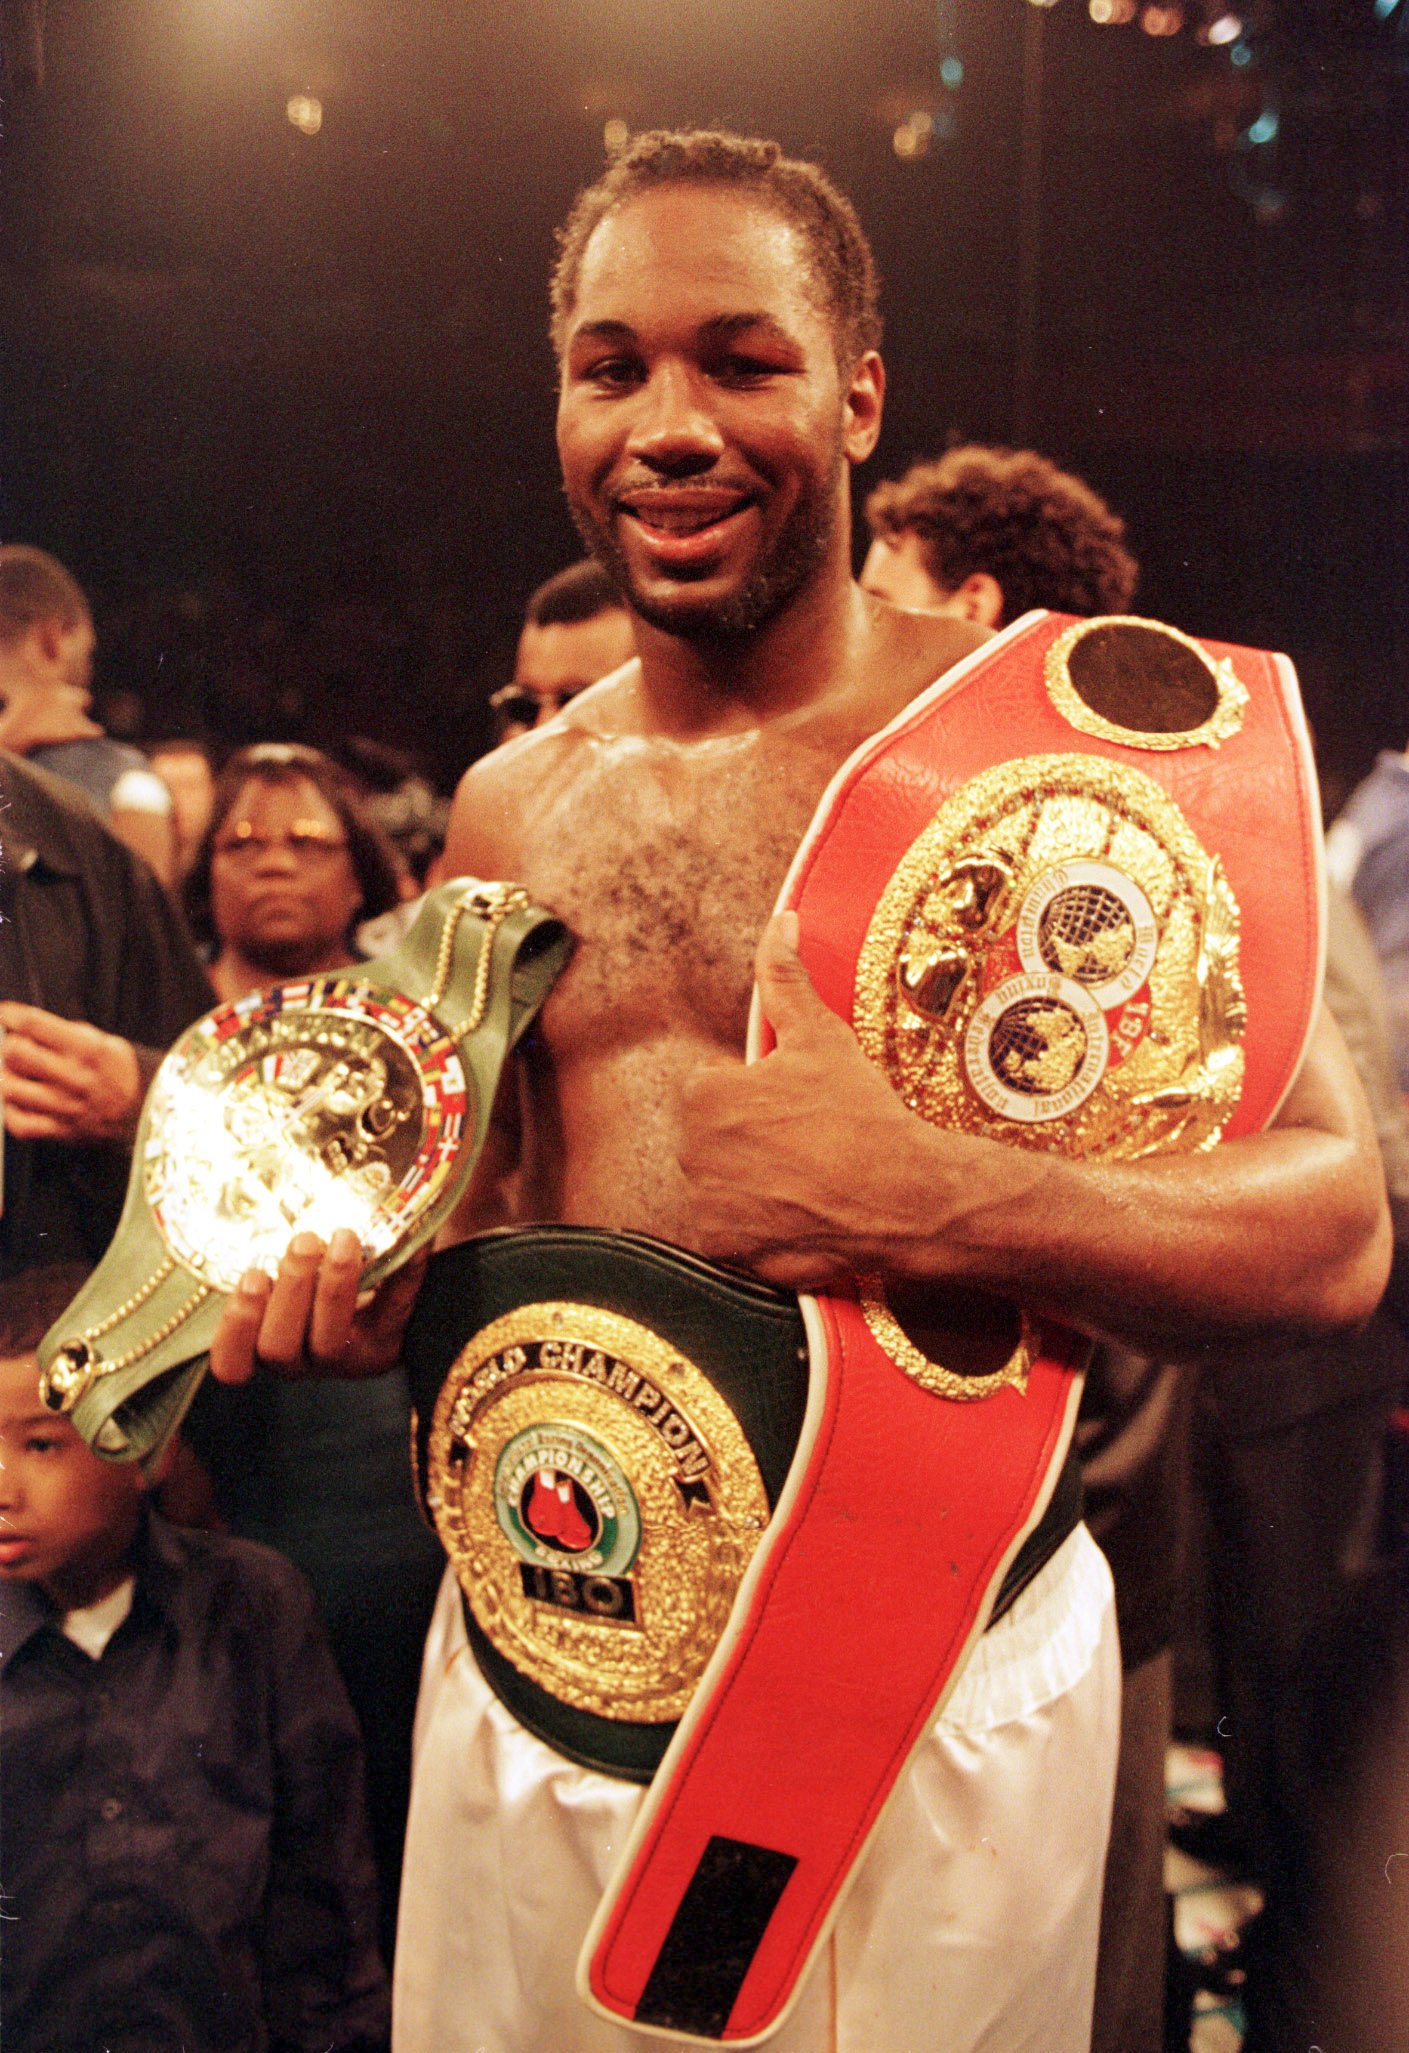 29 Apr 2000: Heavyweight champion Lennox Lewis holds his belts after defeating Michael Grant in the second round of their WBC/IBF Heavyweight fight at Madison Square Garden in New York City. Lewis won by TKO in the second round. Mandatory Credit: Al Bello